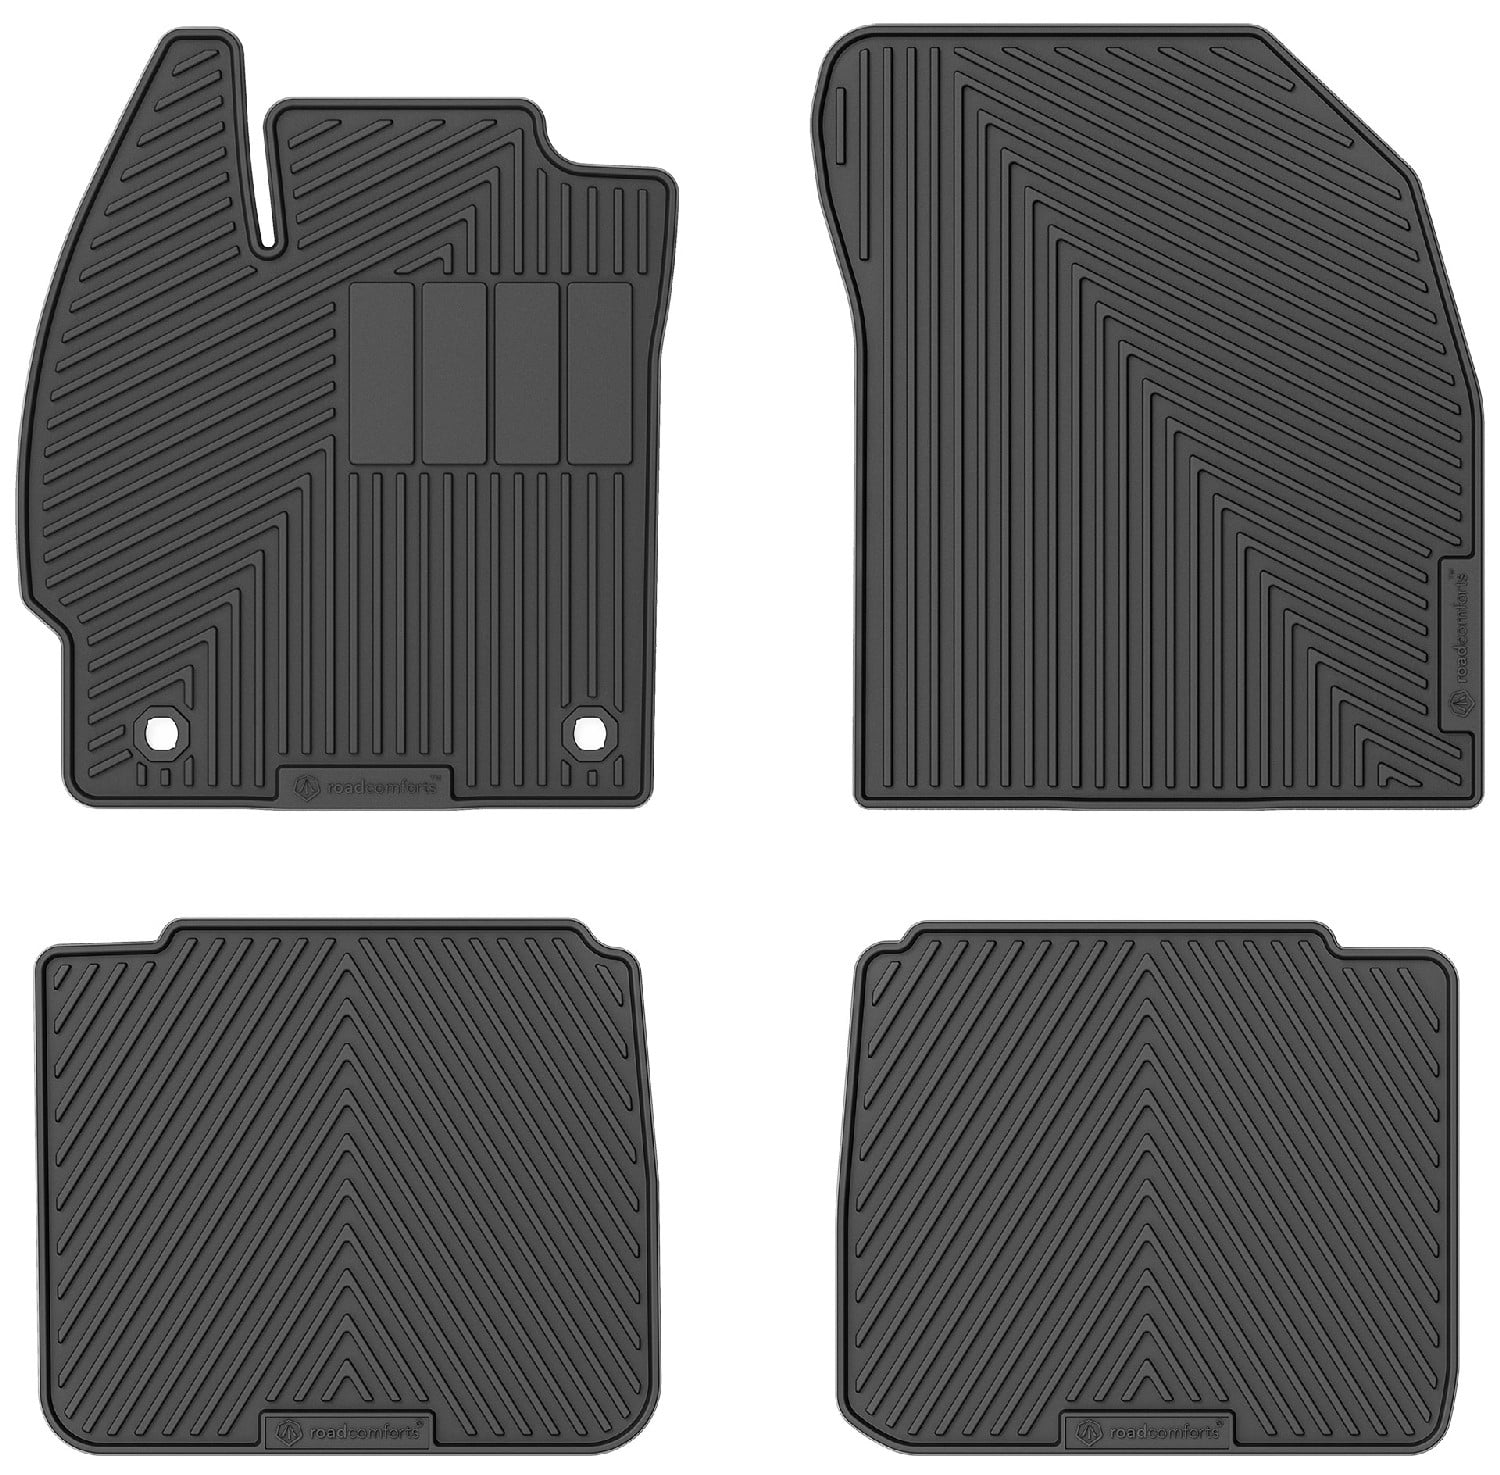 RoadComforts RC48408 Custom Fit All-Weather Floor Mats for 2014 Toyota Prius Plug-In Hybrid 2014 Toyota Prius All Weather Floor Mats